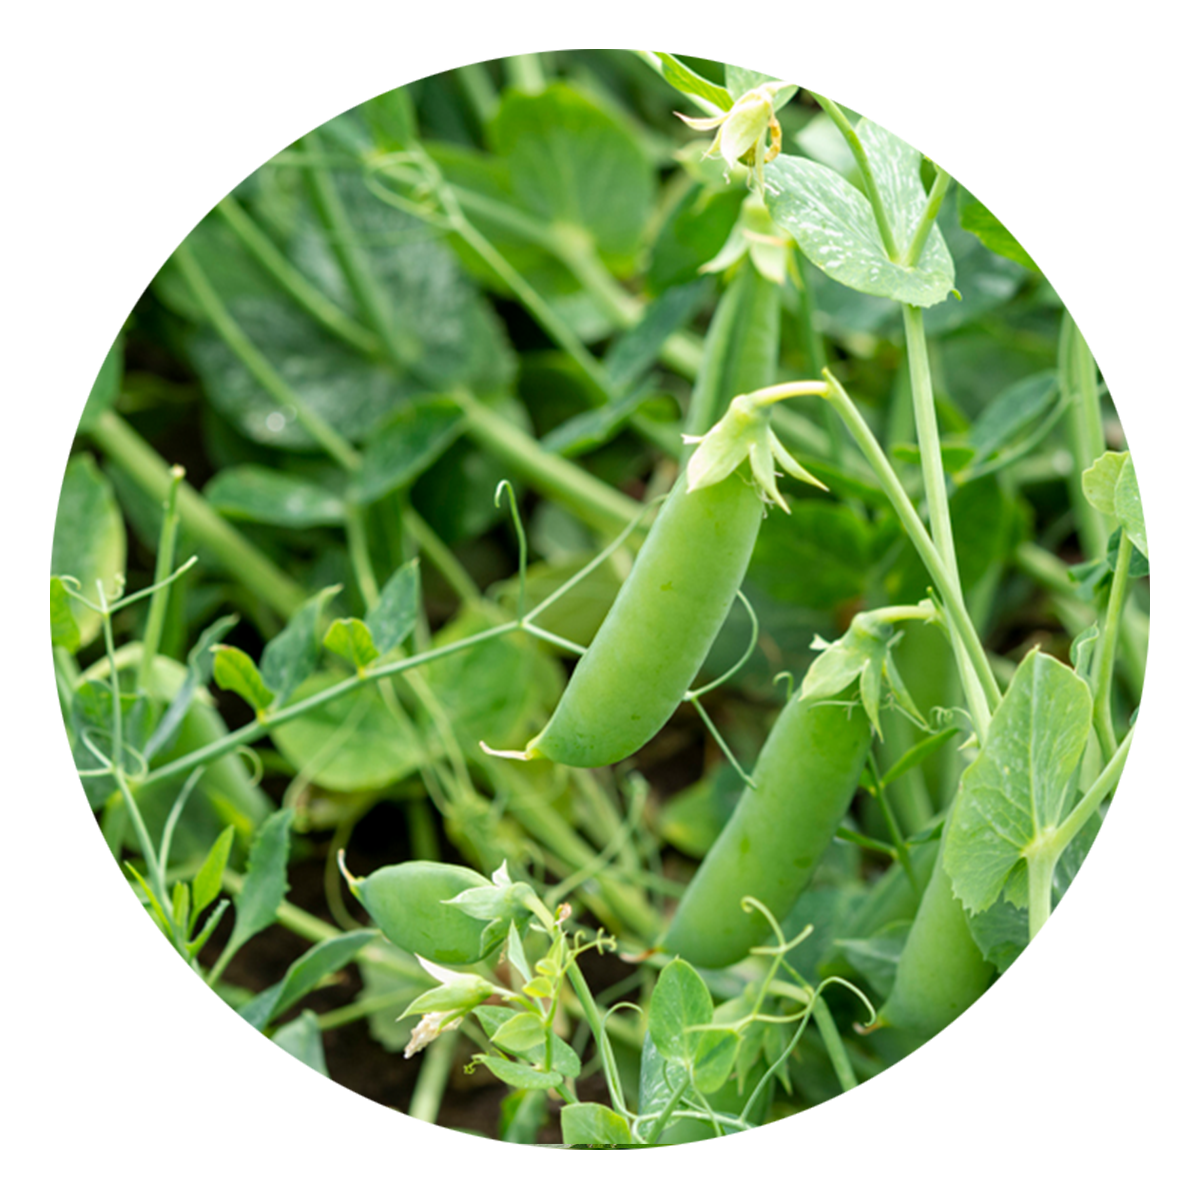 Peas by Seed